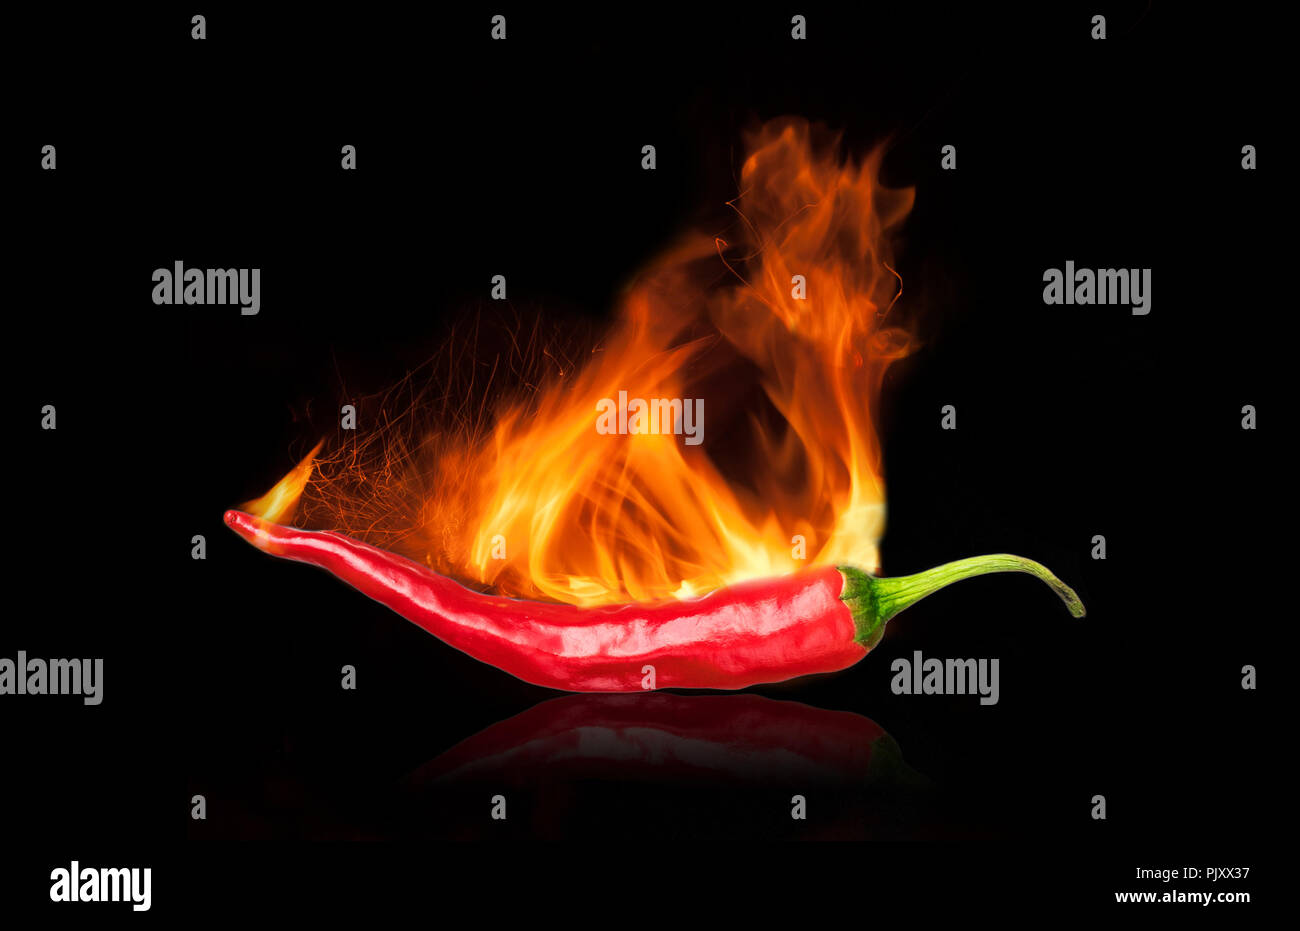 single red chili peppers  with fire on black background Stock Photo